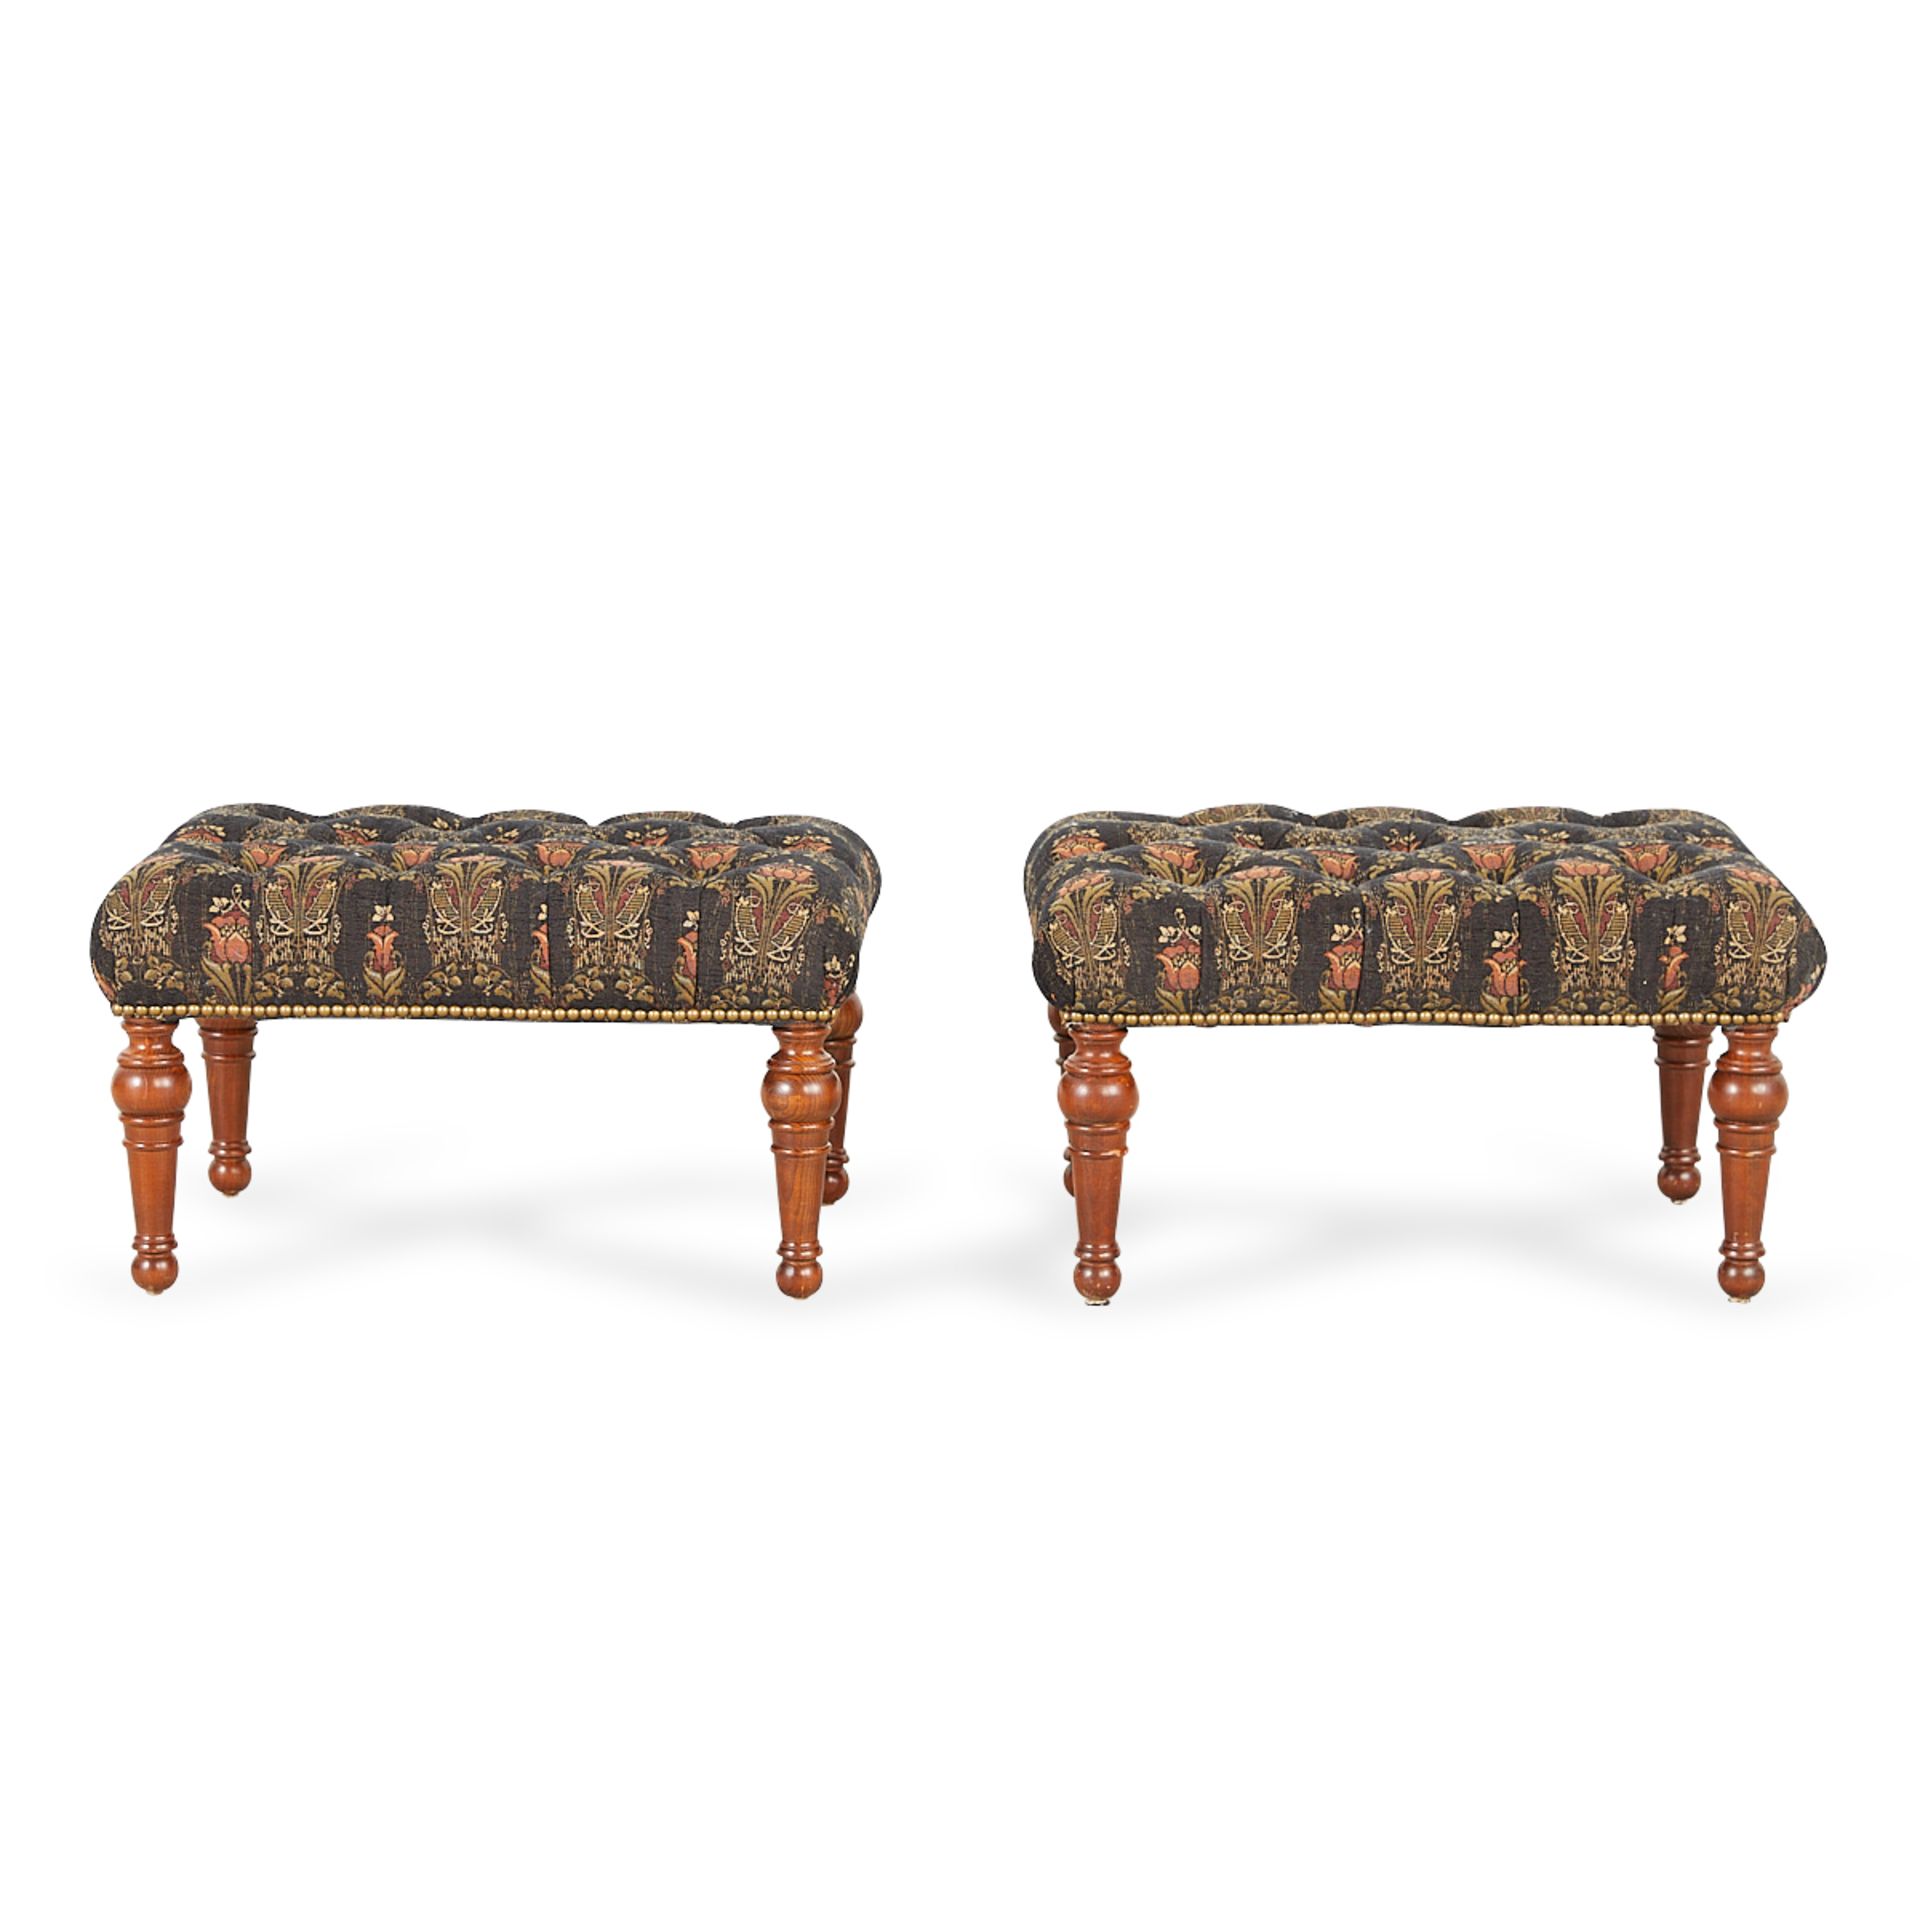 Pair of Stickley Tufted Chairs w/Ottomans - Image 15 of 22